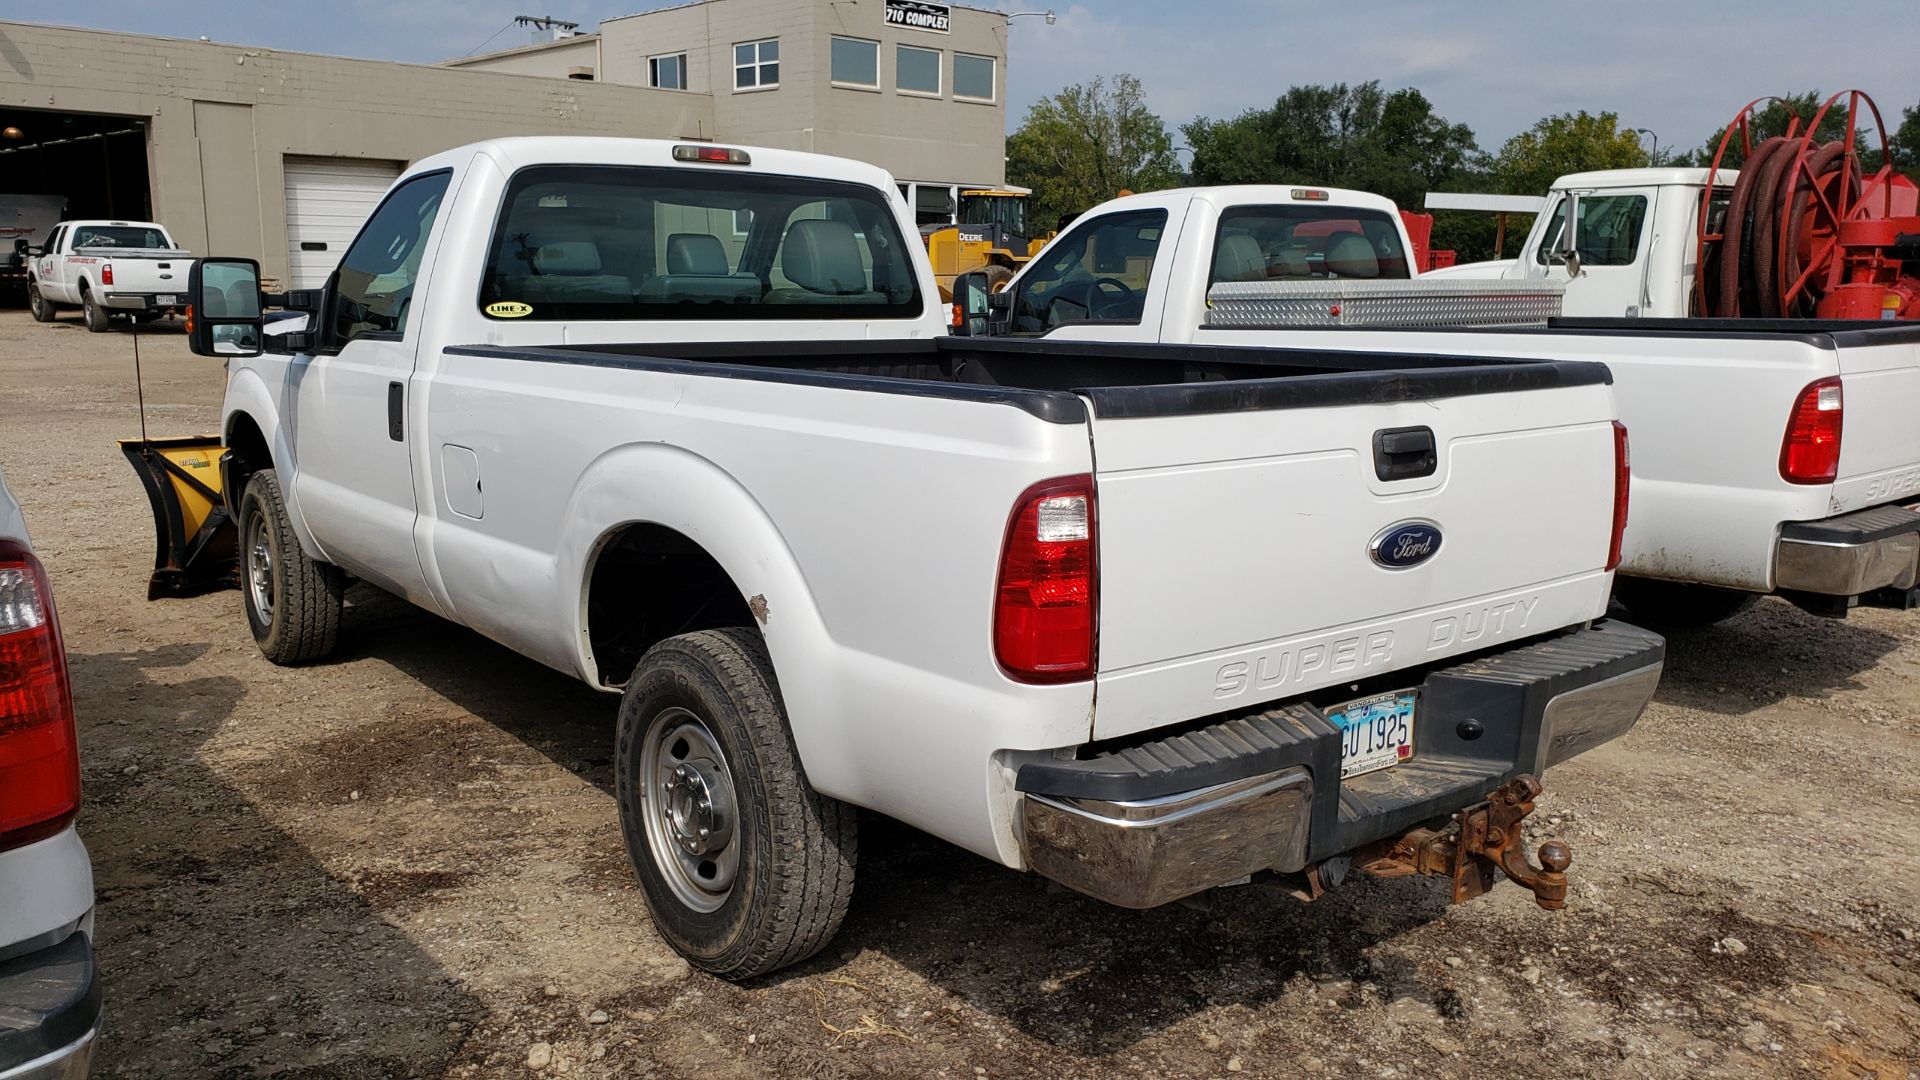 2011 Ford F250 Super Duty Pickup Truck, 8’ Bed, 4x4, 6.2 Liter Flex Fuel,Automatic, Air, Tilt, - Image 9 of 11